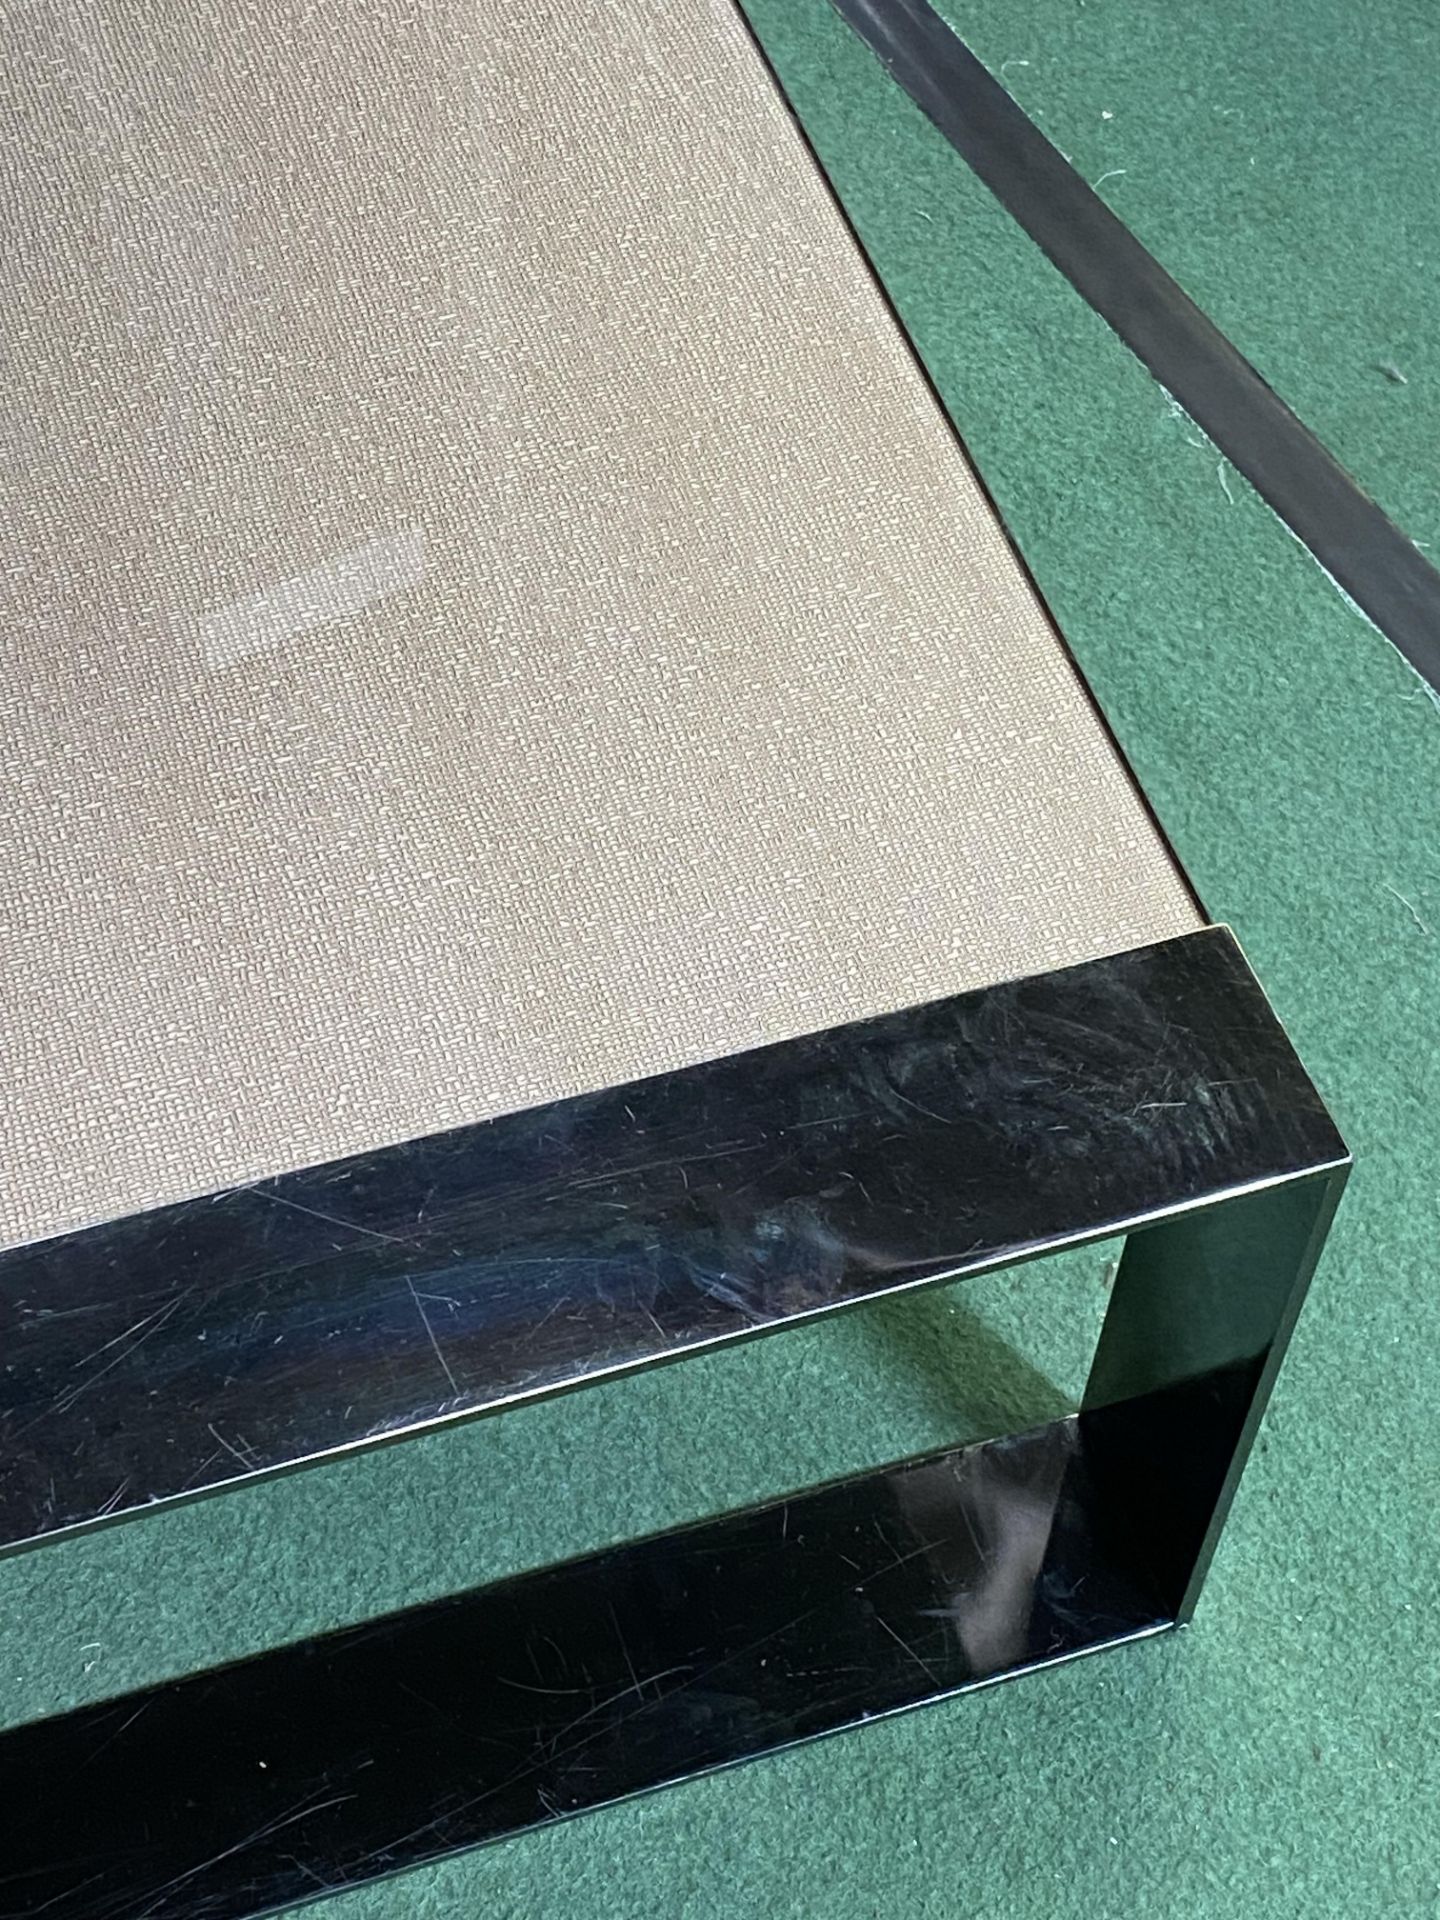 Coffee table with glass top - Image 6 of 6